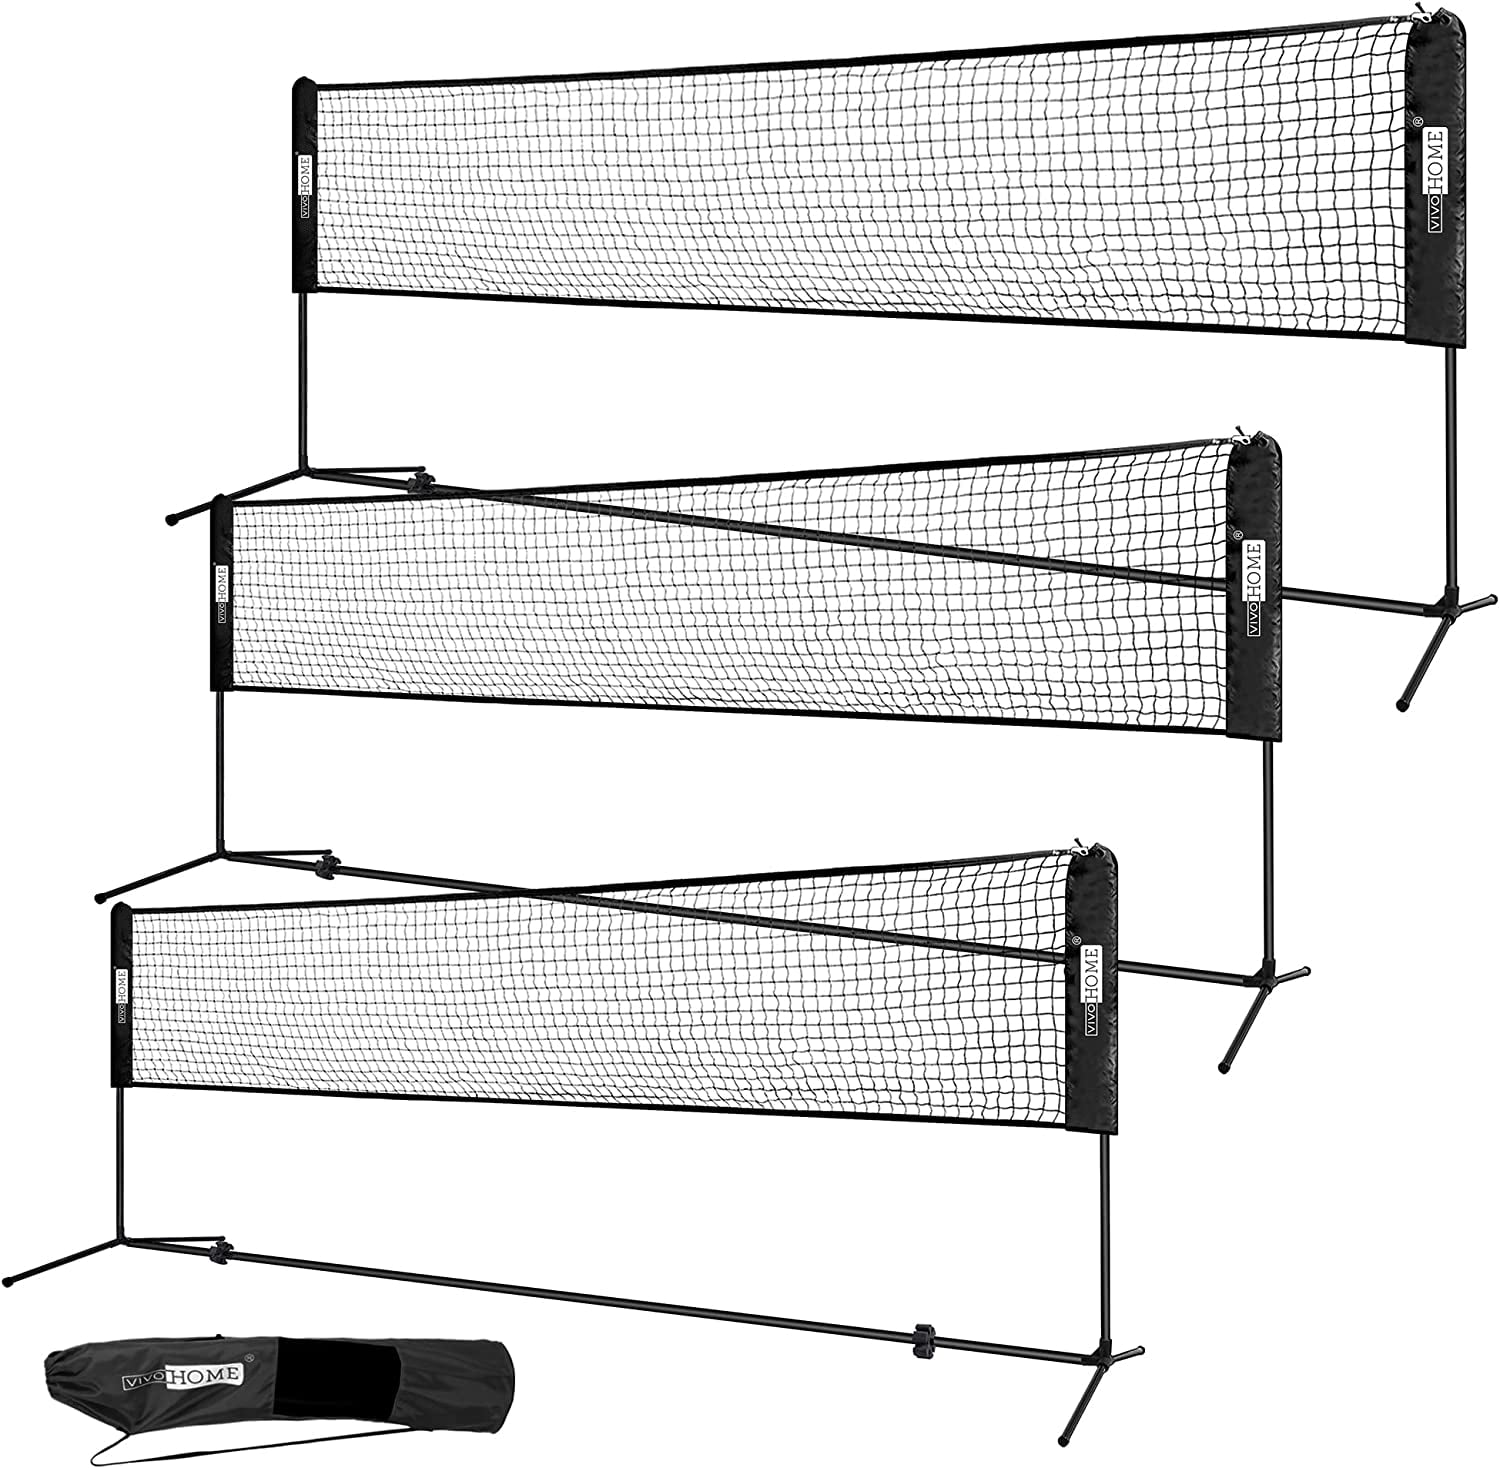 Portable Outdoor Badminton Rackets Net Set Exercise Sports Tools System 